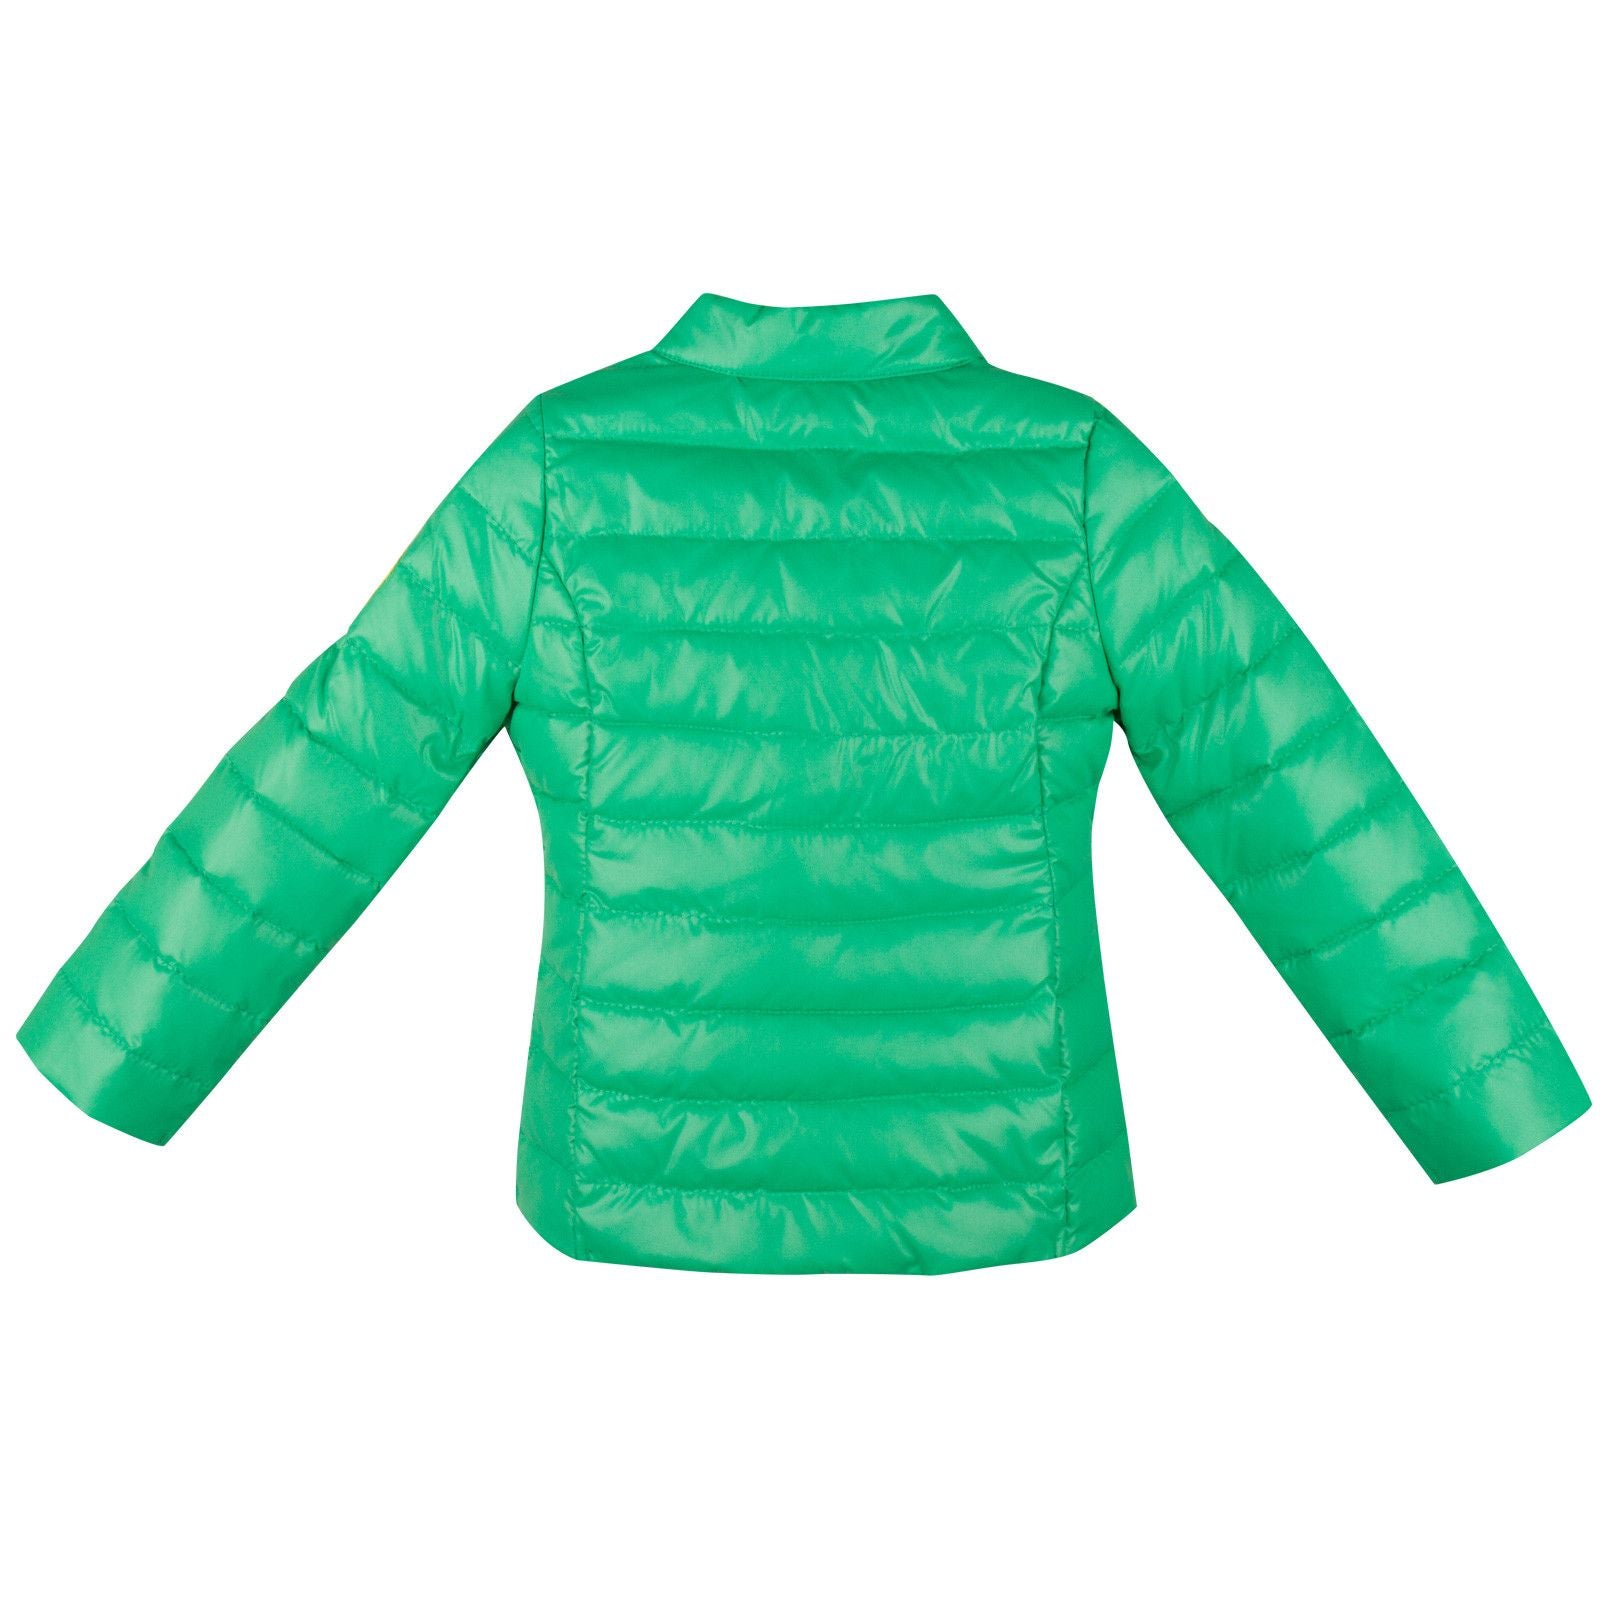 Girls Green Down Padded Jacket With Zipper Pockets - CÉMAROSE | Children's Fashion Store - 2